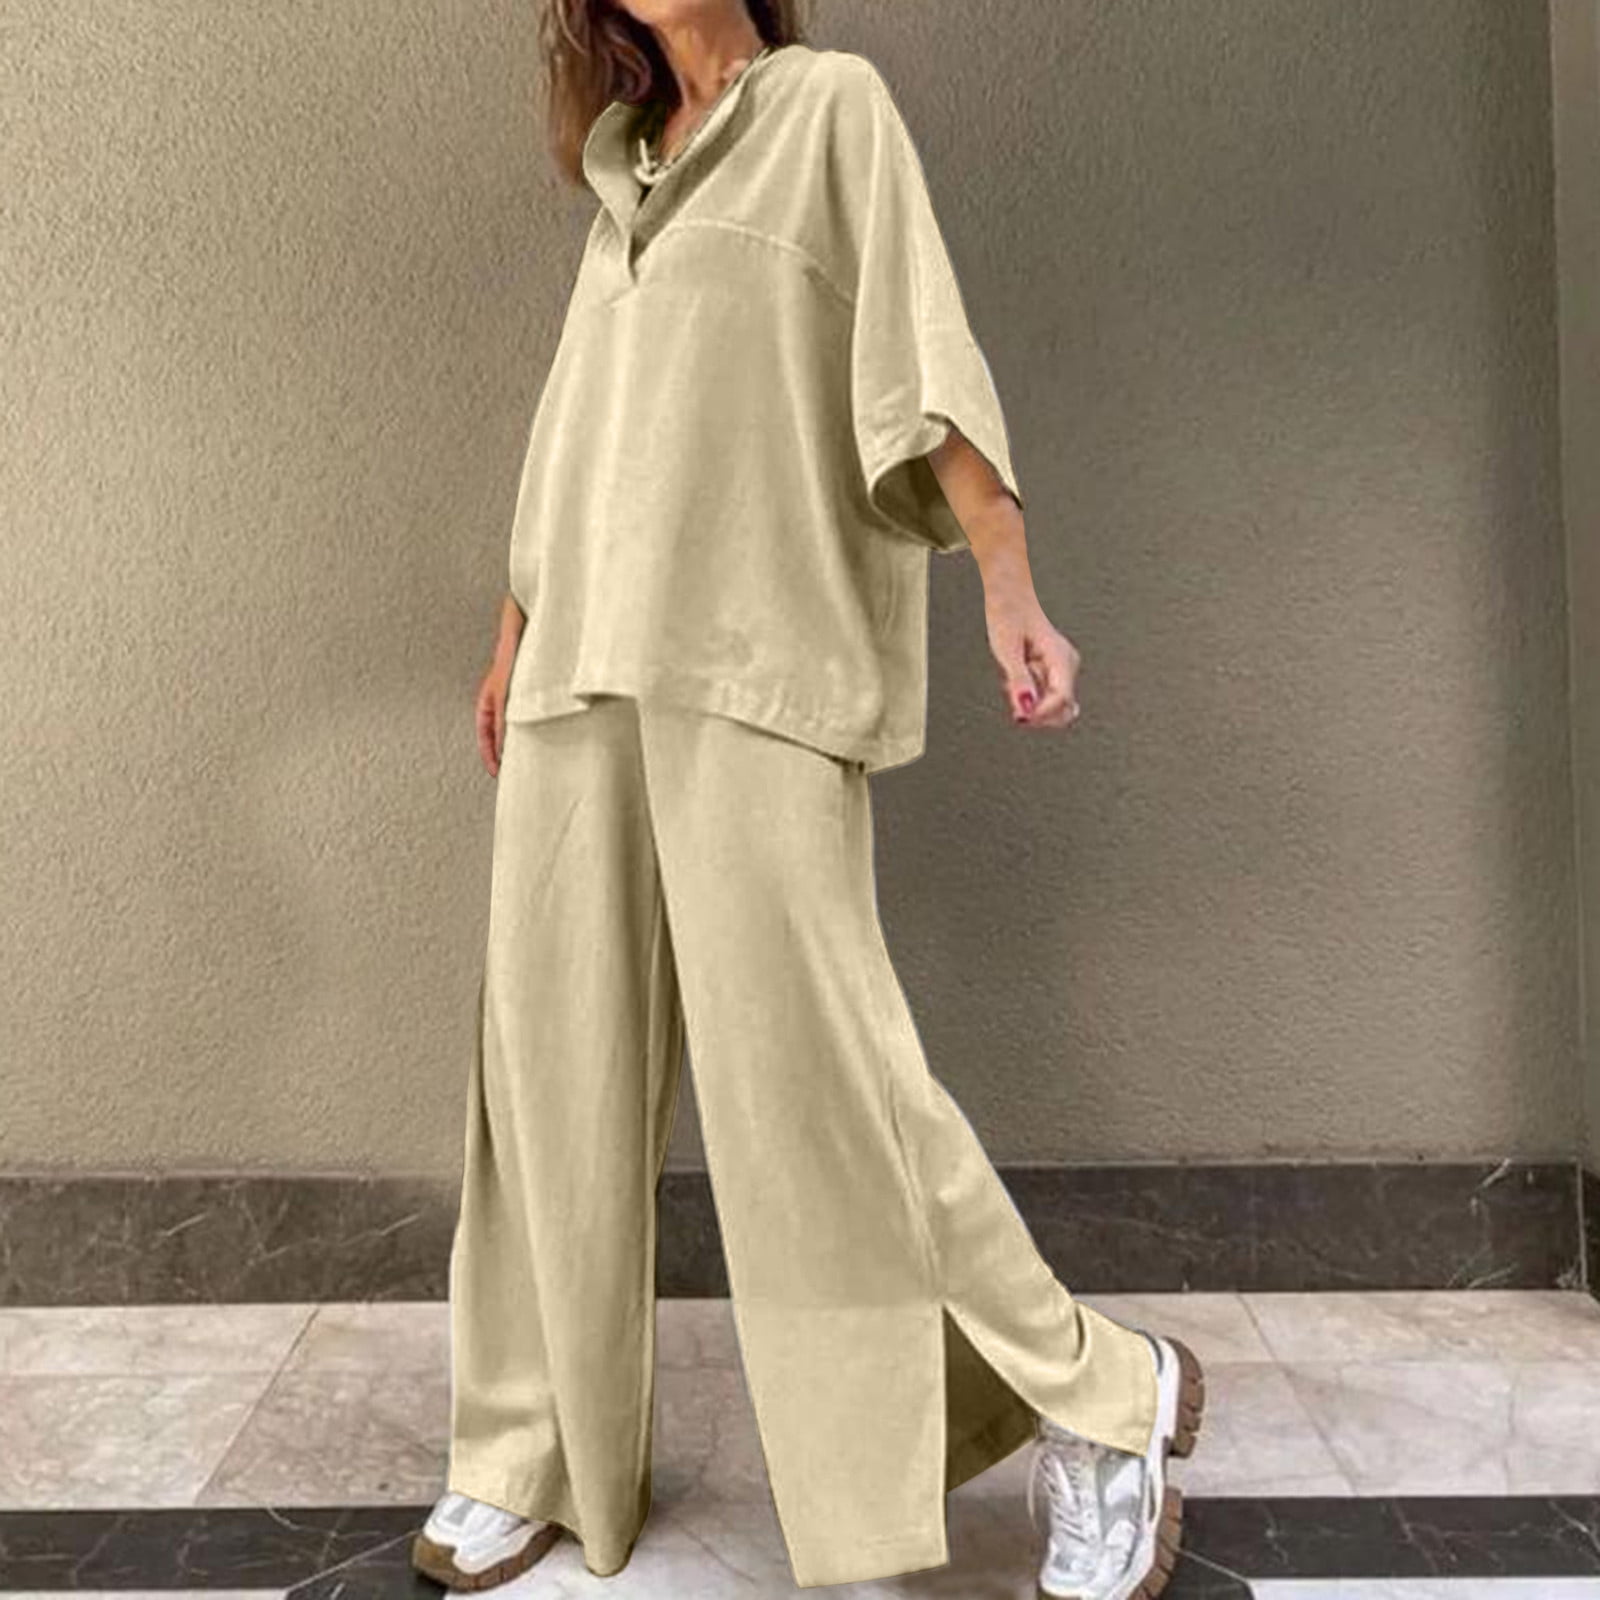 QUYUON Women Linen Pants Sets 2 Piece Outfits Plus Size Long Sleeve V Neck  Tops and Full Length Long Pants Sets Two Piece Outfits Loungewear Casual